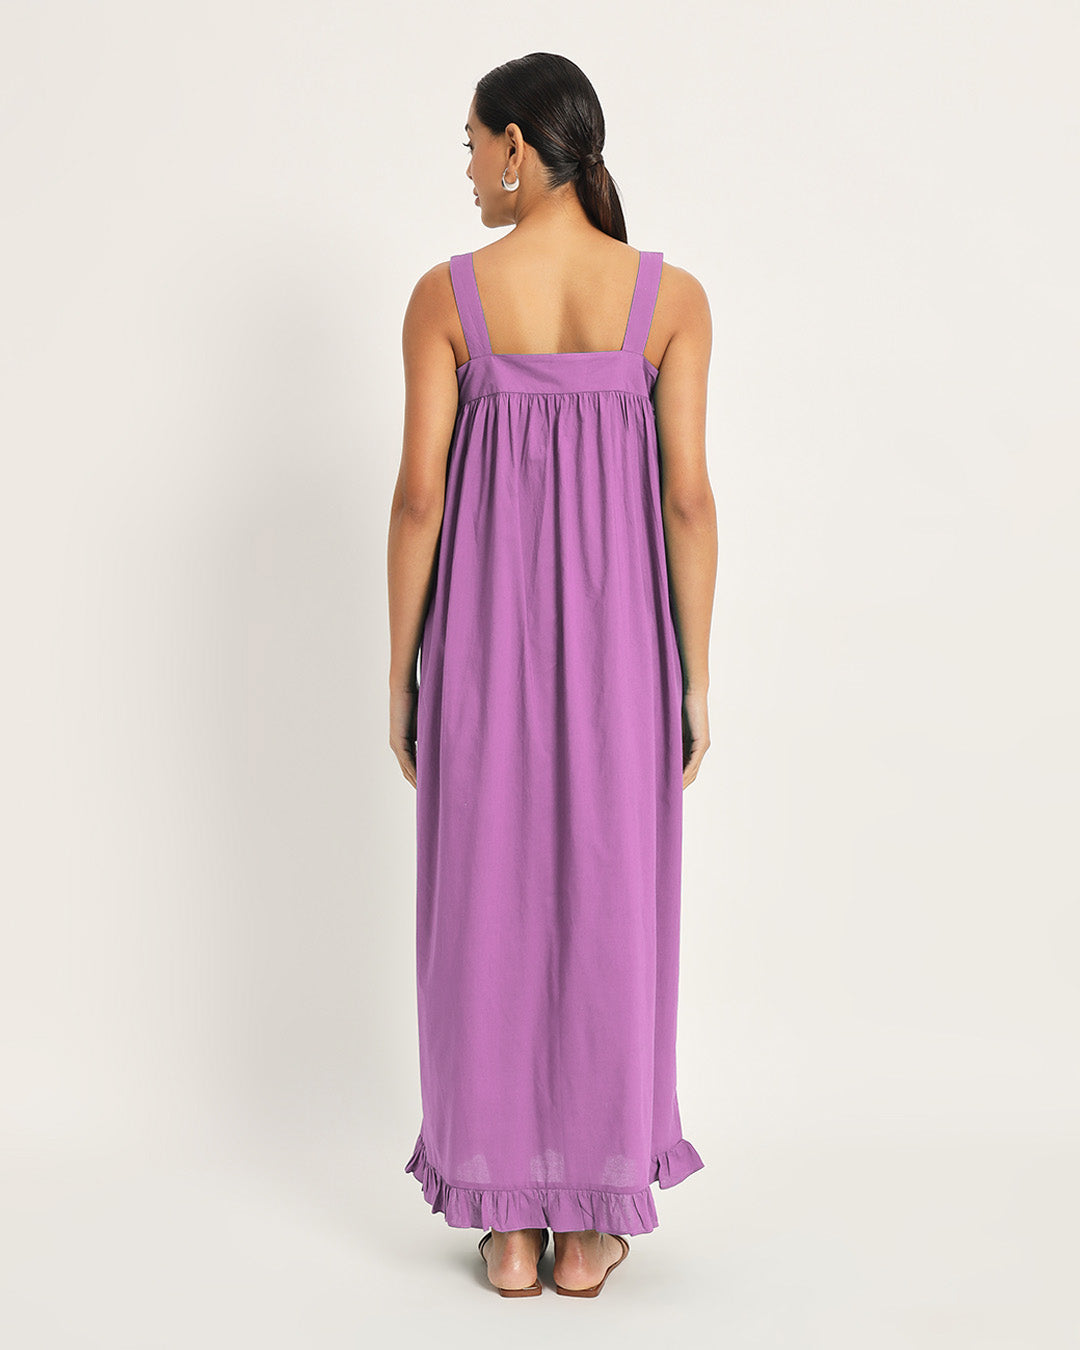 Combo: Russet Red  & Wisteria Purple Twilight to Noon Nightdress